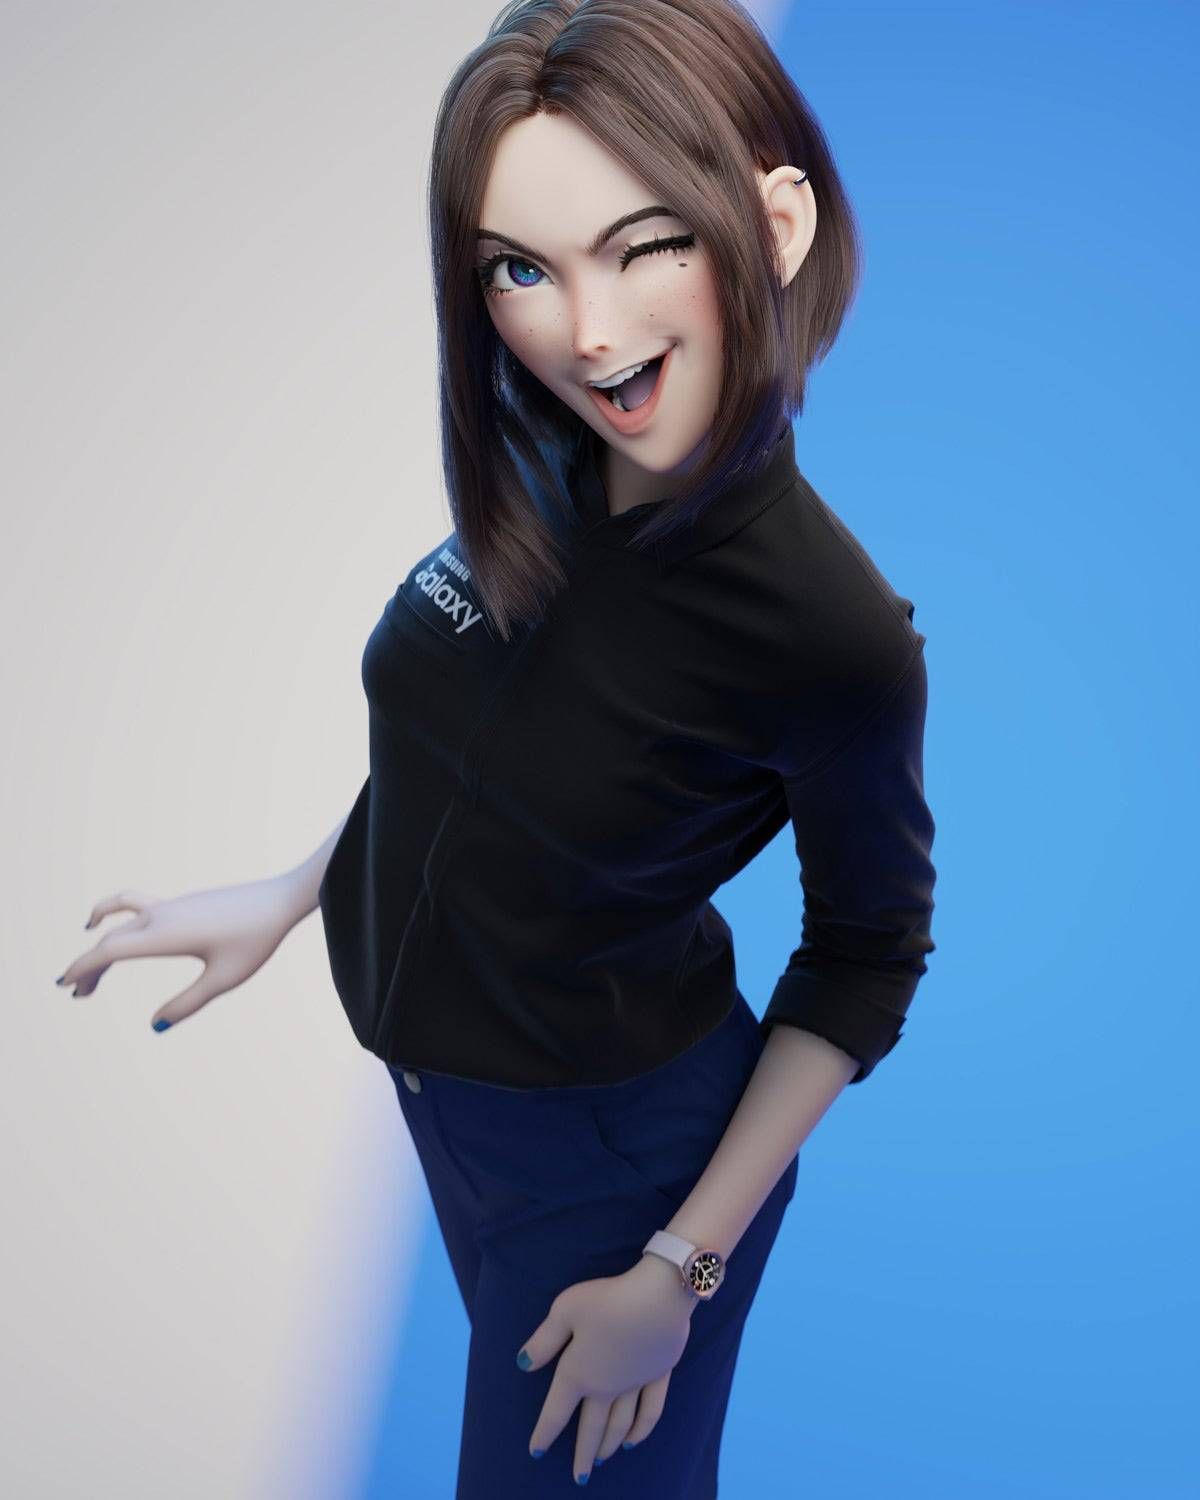 Sam, the Samsung girl is taking over the Internet - Samsung Members